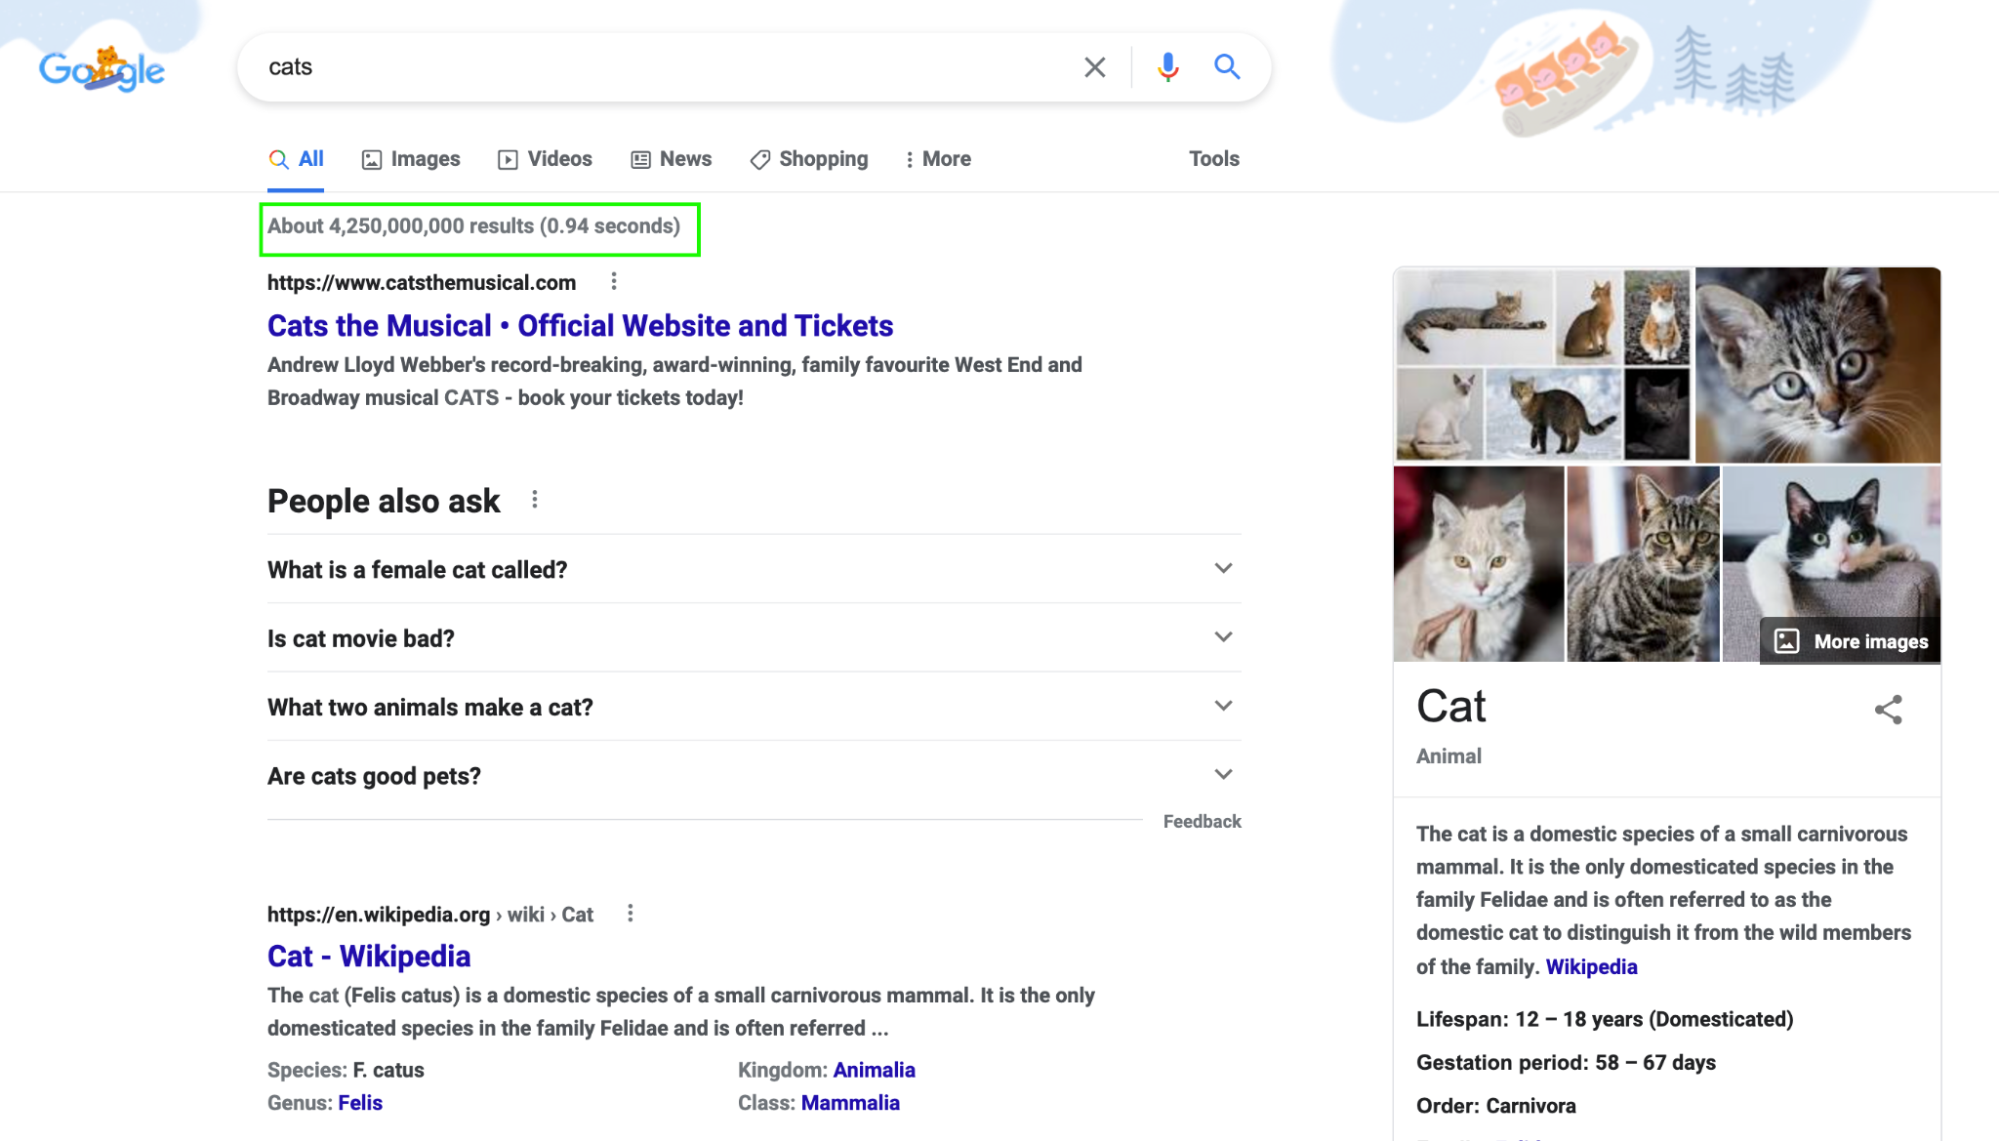 Four billion results when we search for cats on Google!